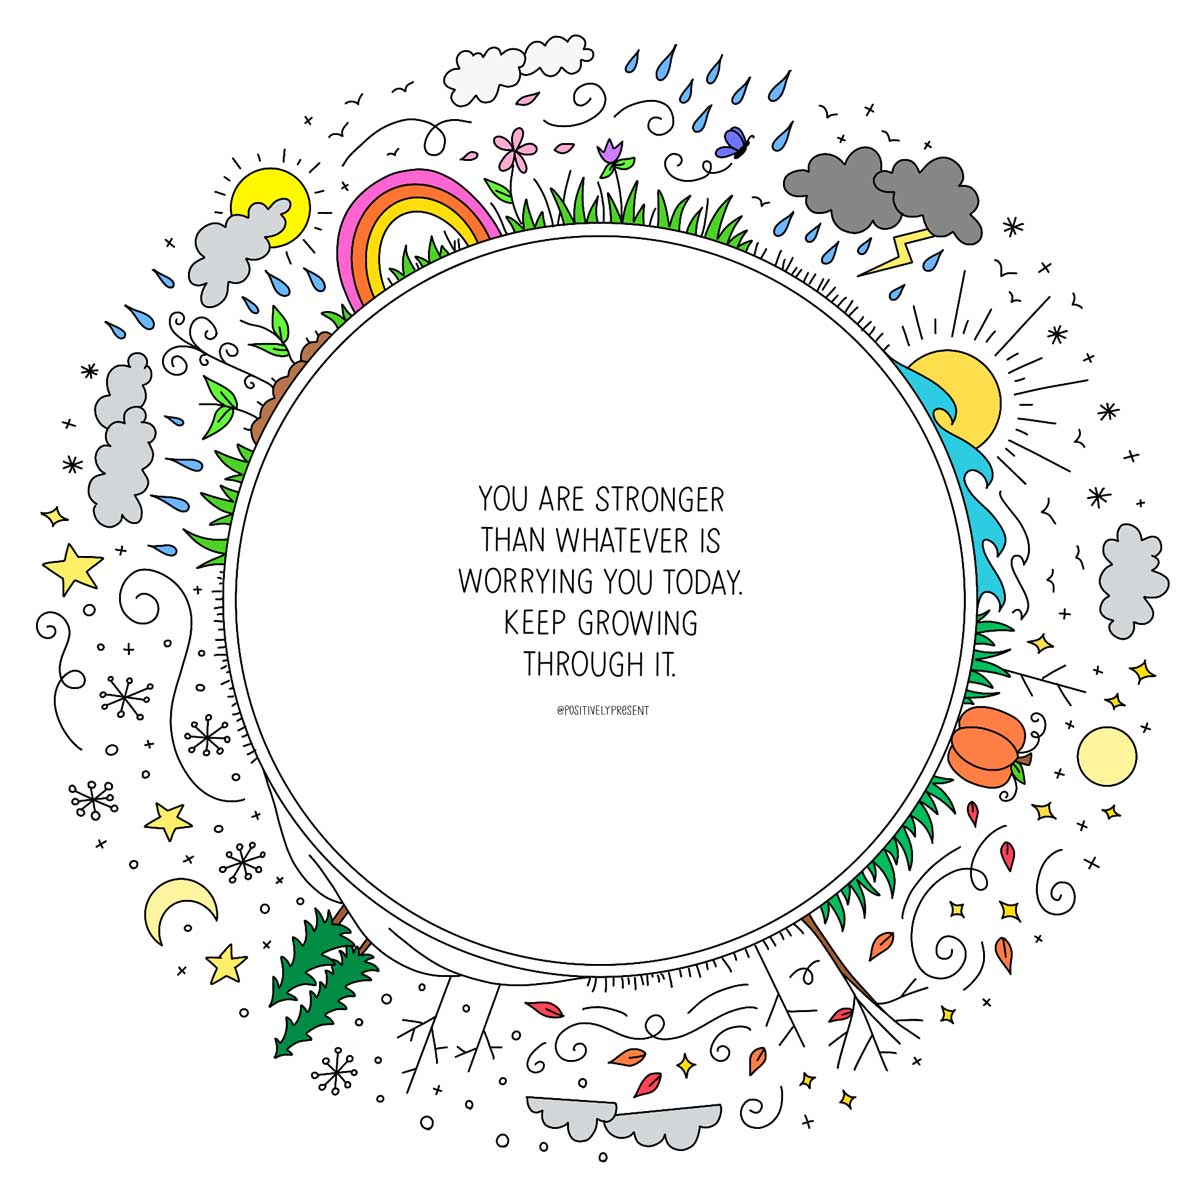 drawings of suns and rainbows surround quote, you are stronger than what worries you.